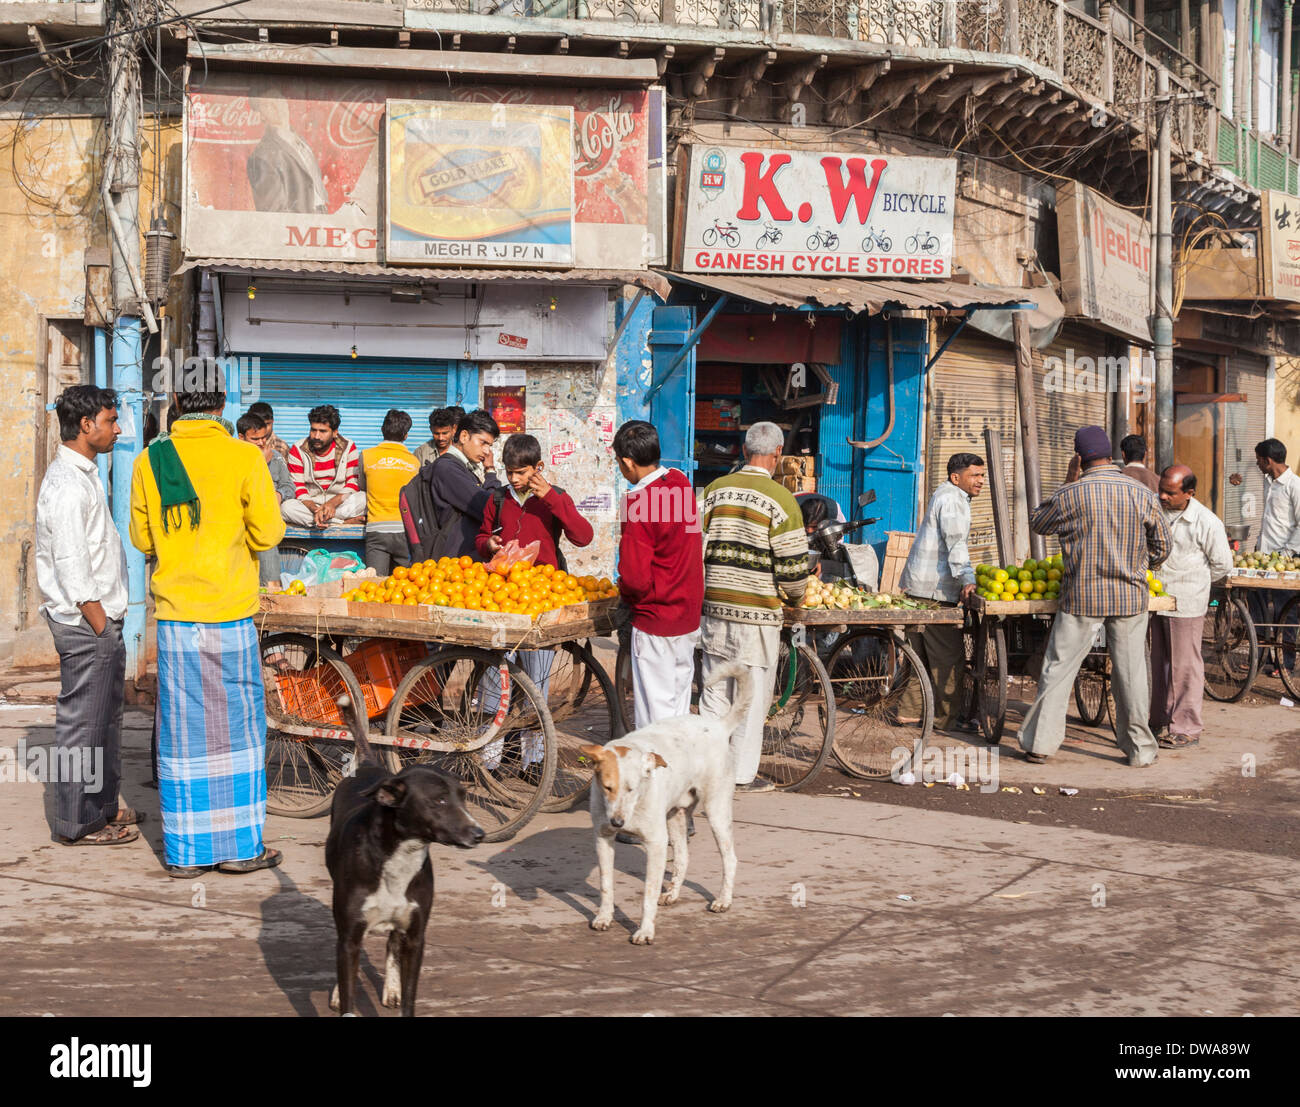 Street scene in Old Delhi, India: local Indian people buying and selling fruit from barrows with bicycle wheels, dogs in street Stock Photo